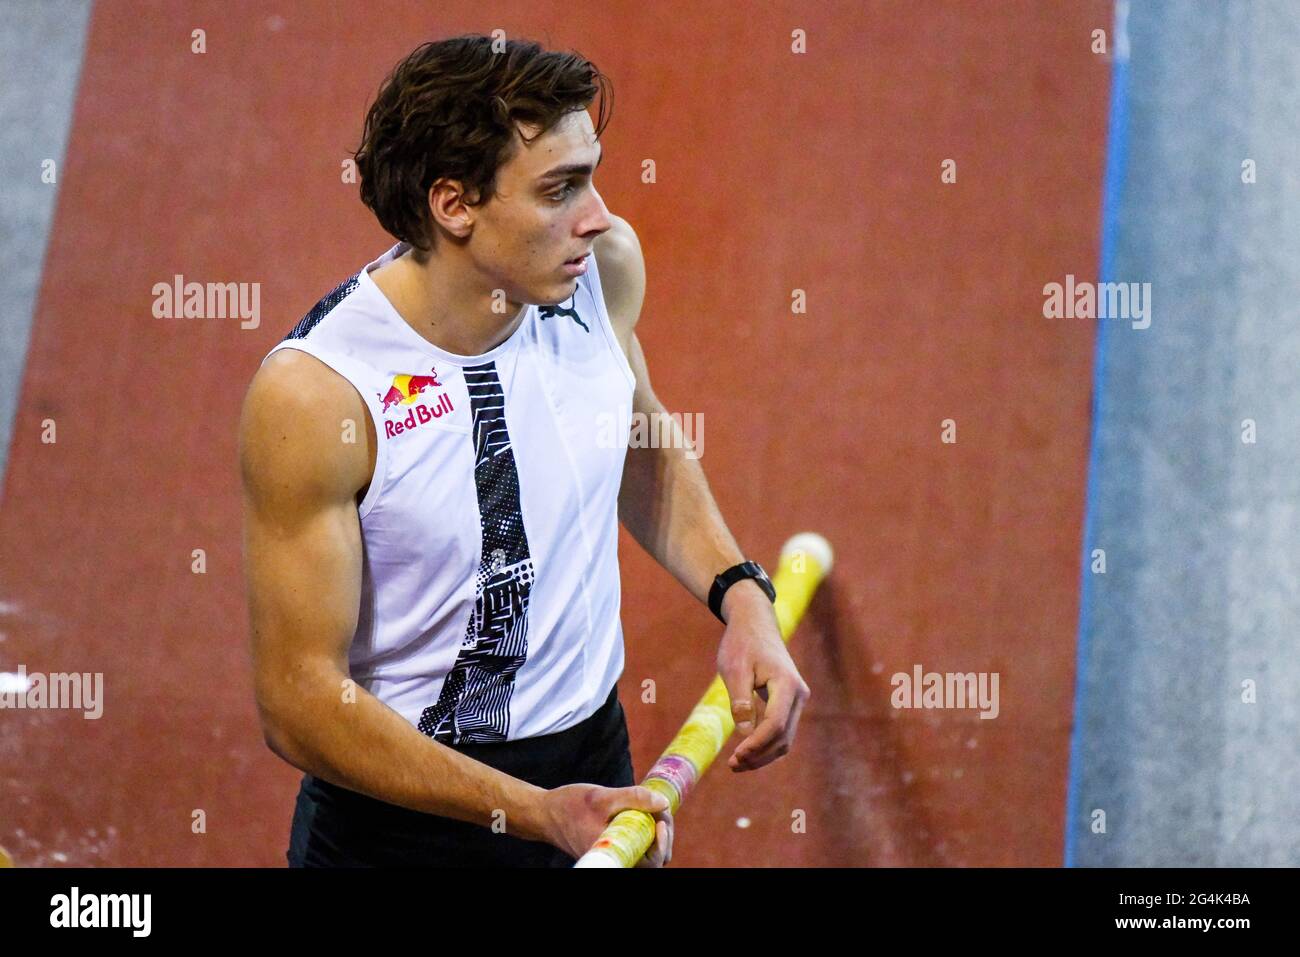 Pole vaulter Armand Duplantis attending the “Perche Elite Tour” in Rouen (northern France) on February 6, 2021 Stock Photo